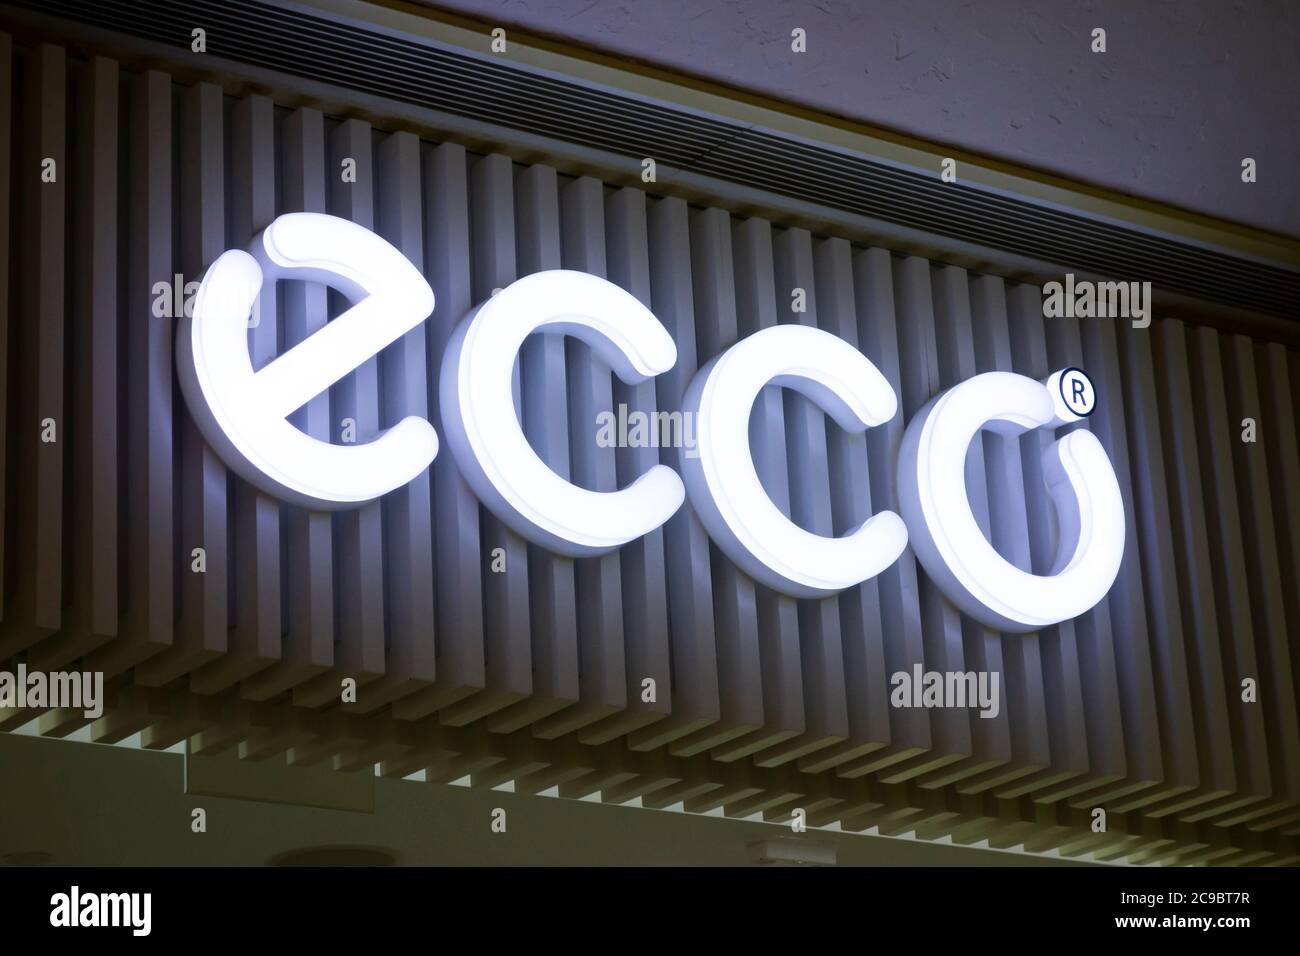 Ecco shop sign stock and images -